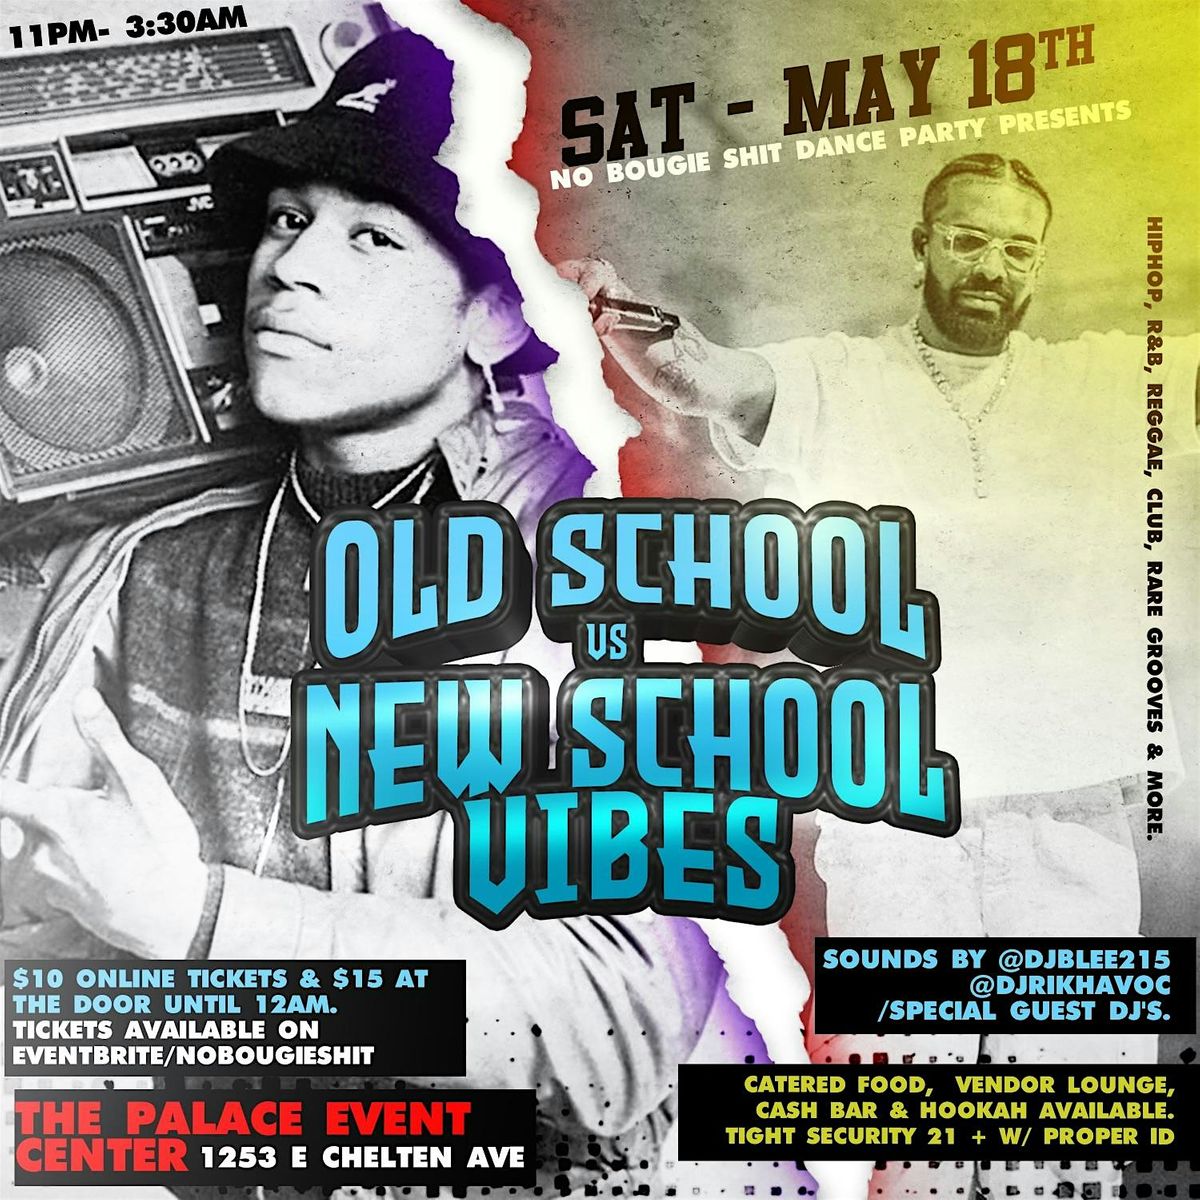 No Bougie Shi* Dance Party "Old School Vs New School Vibes"